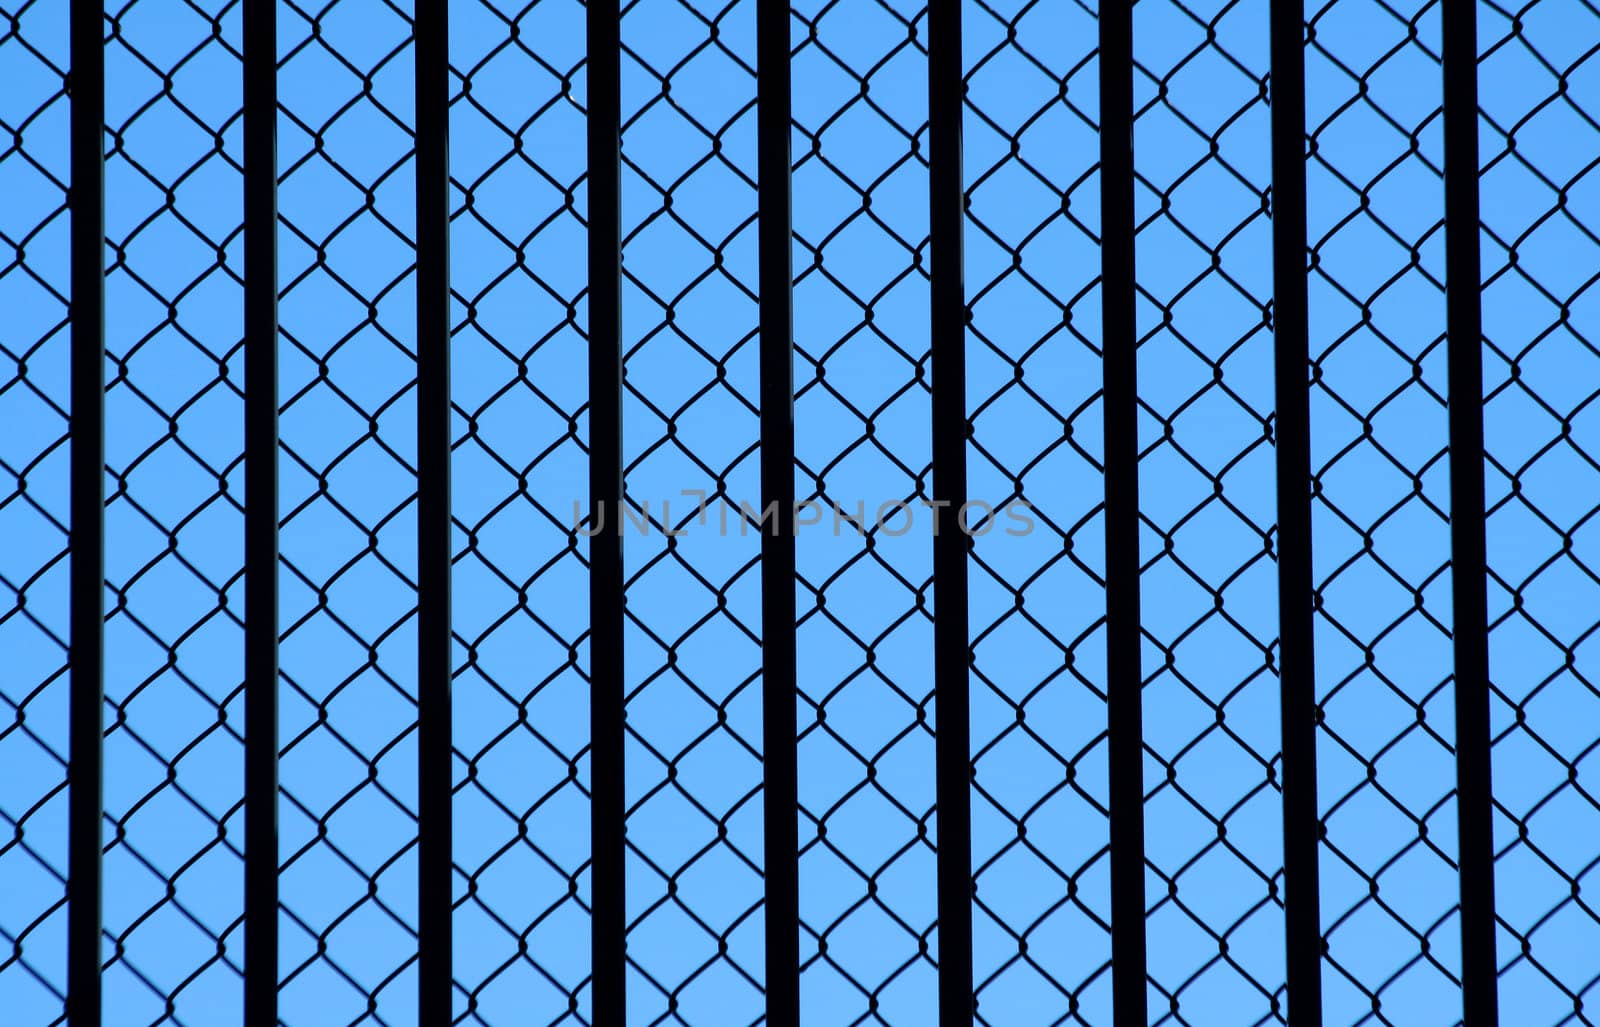 A Chainlink fence background texture